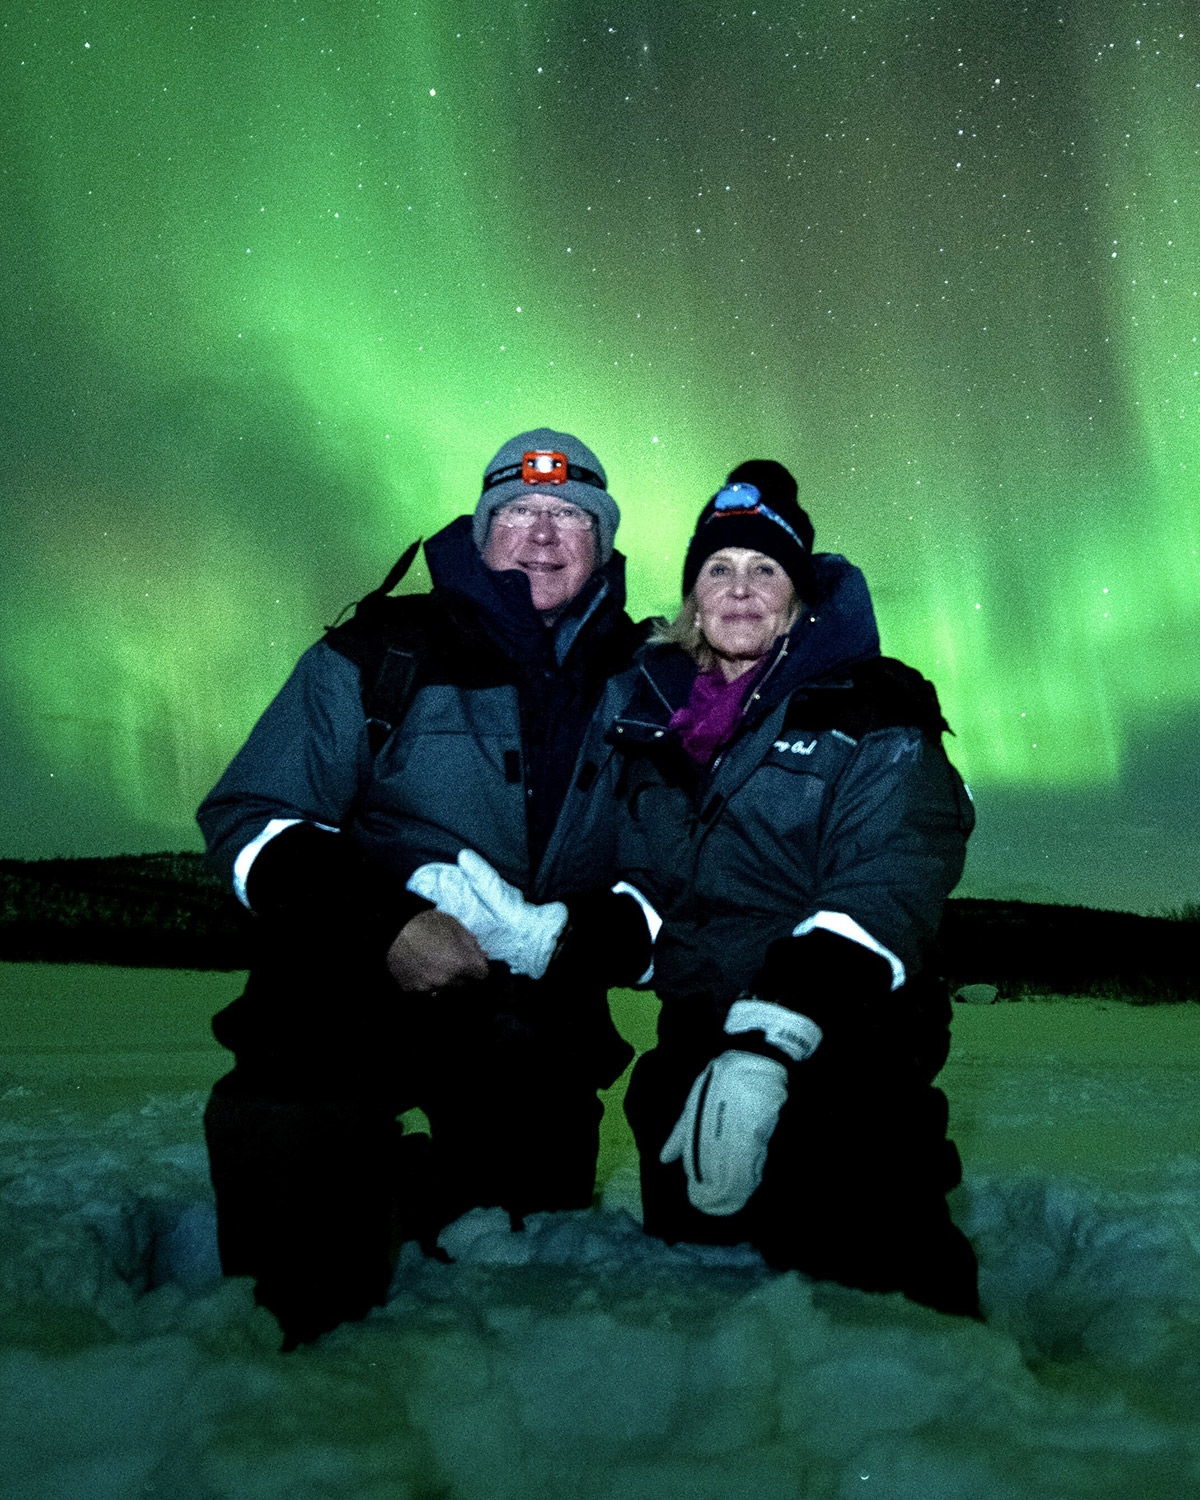 Susan and James F. "Jim" Thompson ’83, kneeling in the snow with the Northern Lights behind them.